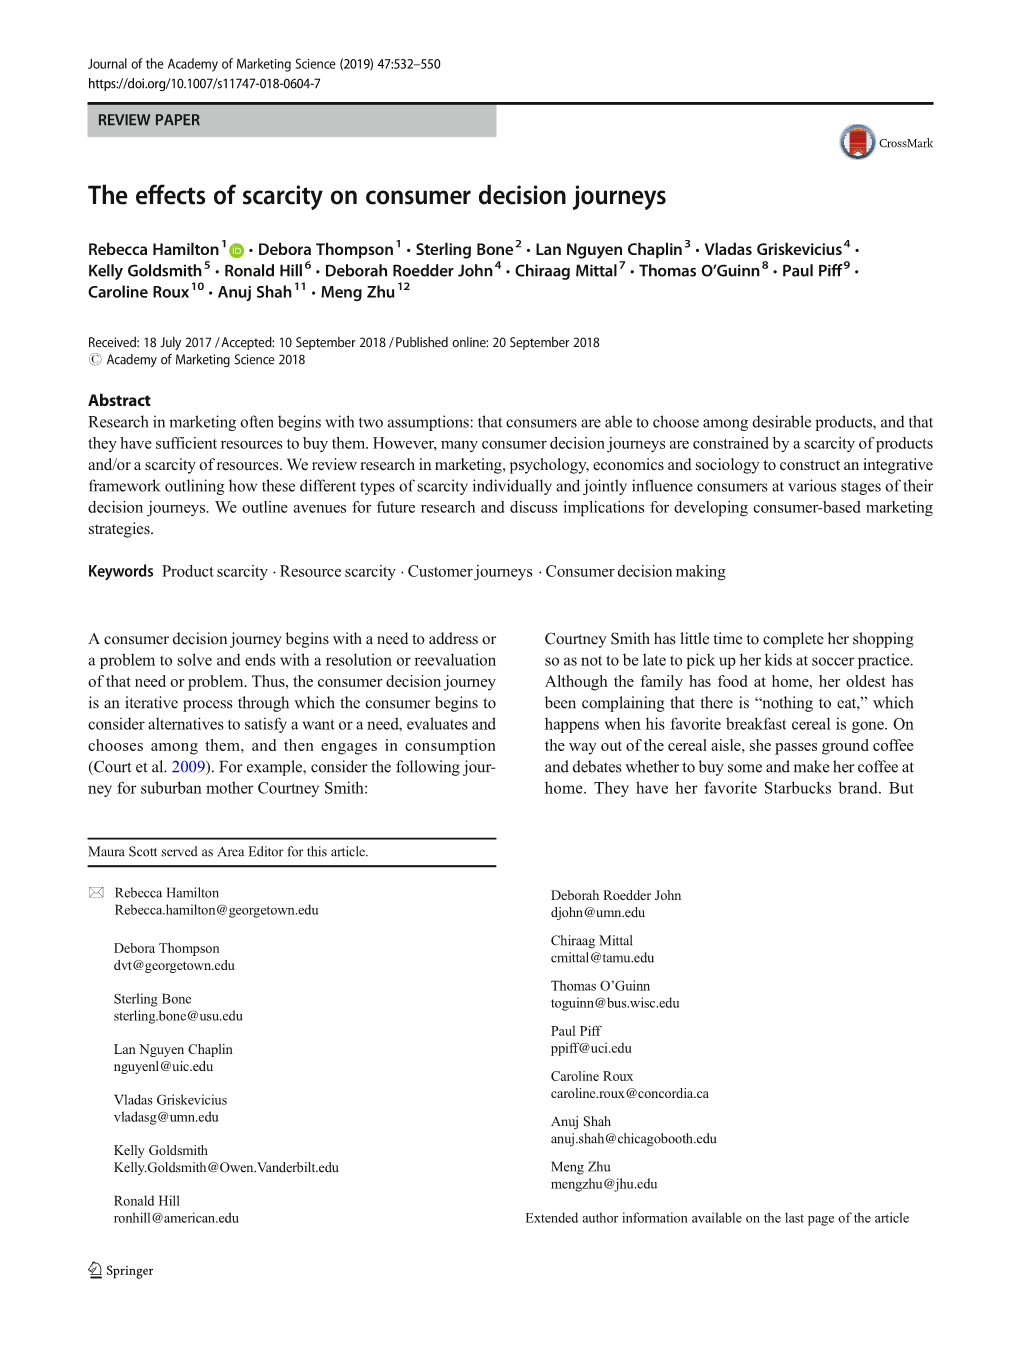 The Effects of Scarcity on Consumer Decision Journeys